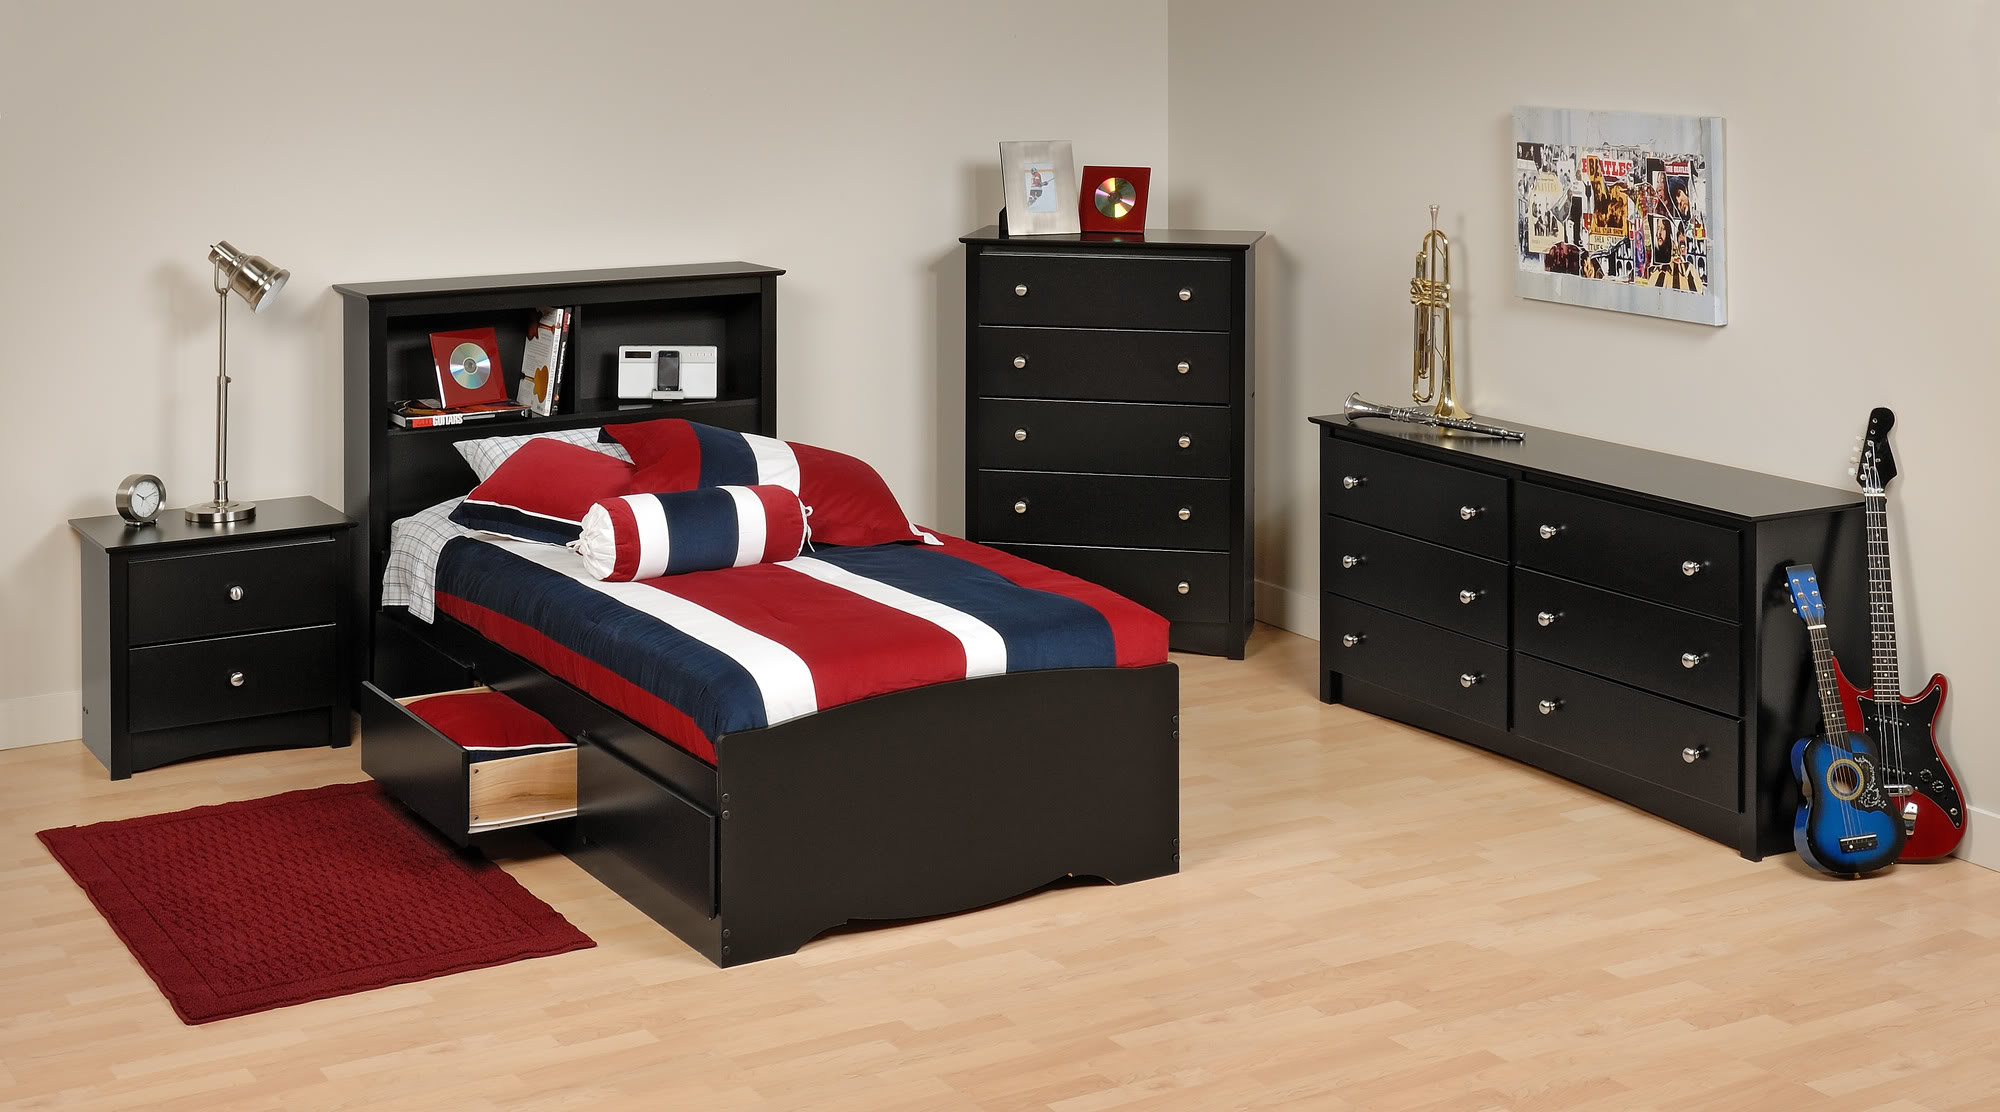 Black Twin Bedroom Furniture Home Decor Photos Gallery for measurements 2000 X 1112